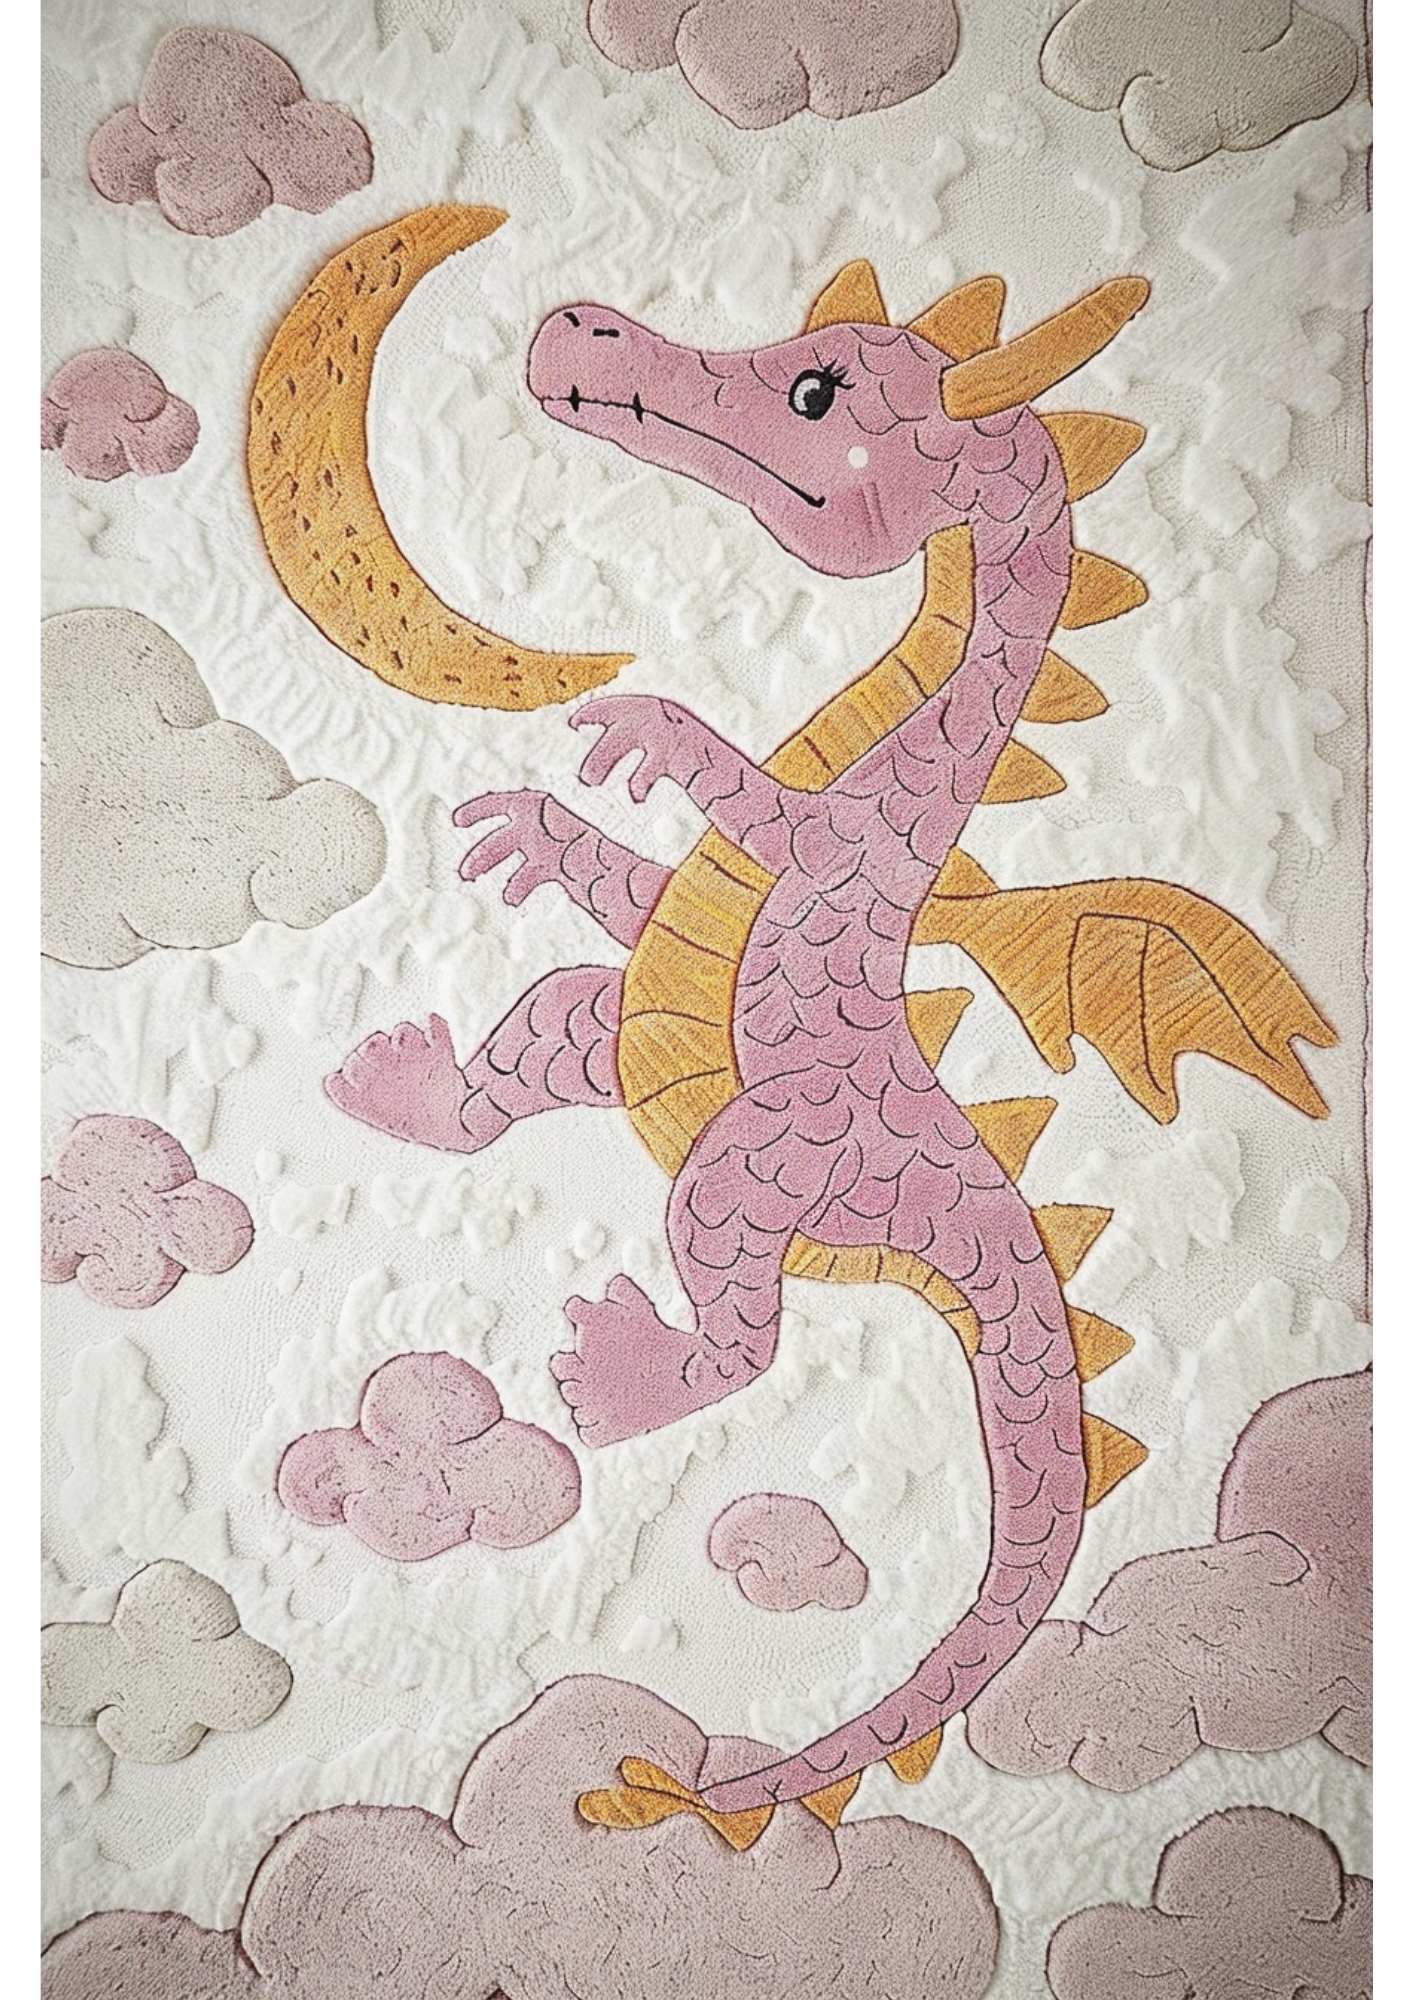 The Moonlit Baby Dragon Hand Tufted Rug: A whimsical design featuring a young dragon under moonlight. Hand-tufted with meticulous care, it adds a touch of magic and innocence to any room.